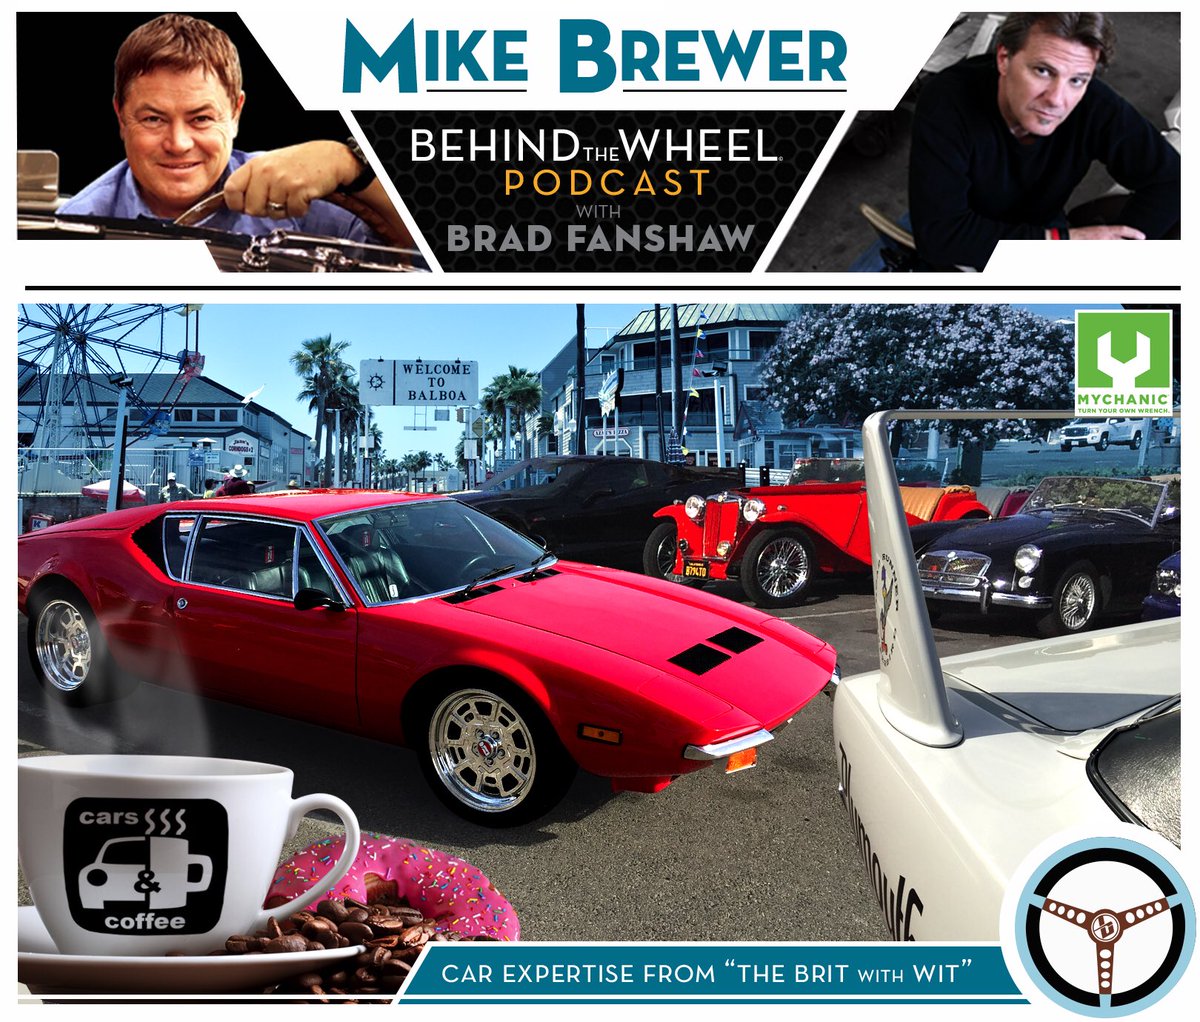 We have Ep 7 ready and waiting of @MikeBrewerBTW #podcast  This week @mikebrewer @BradFanshaw take you along to the @NewportBeach #cars&coffee in Balboa. They take you on a tour through the show and as always answer listener questions. #collectorcar #autoadvice